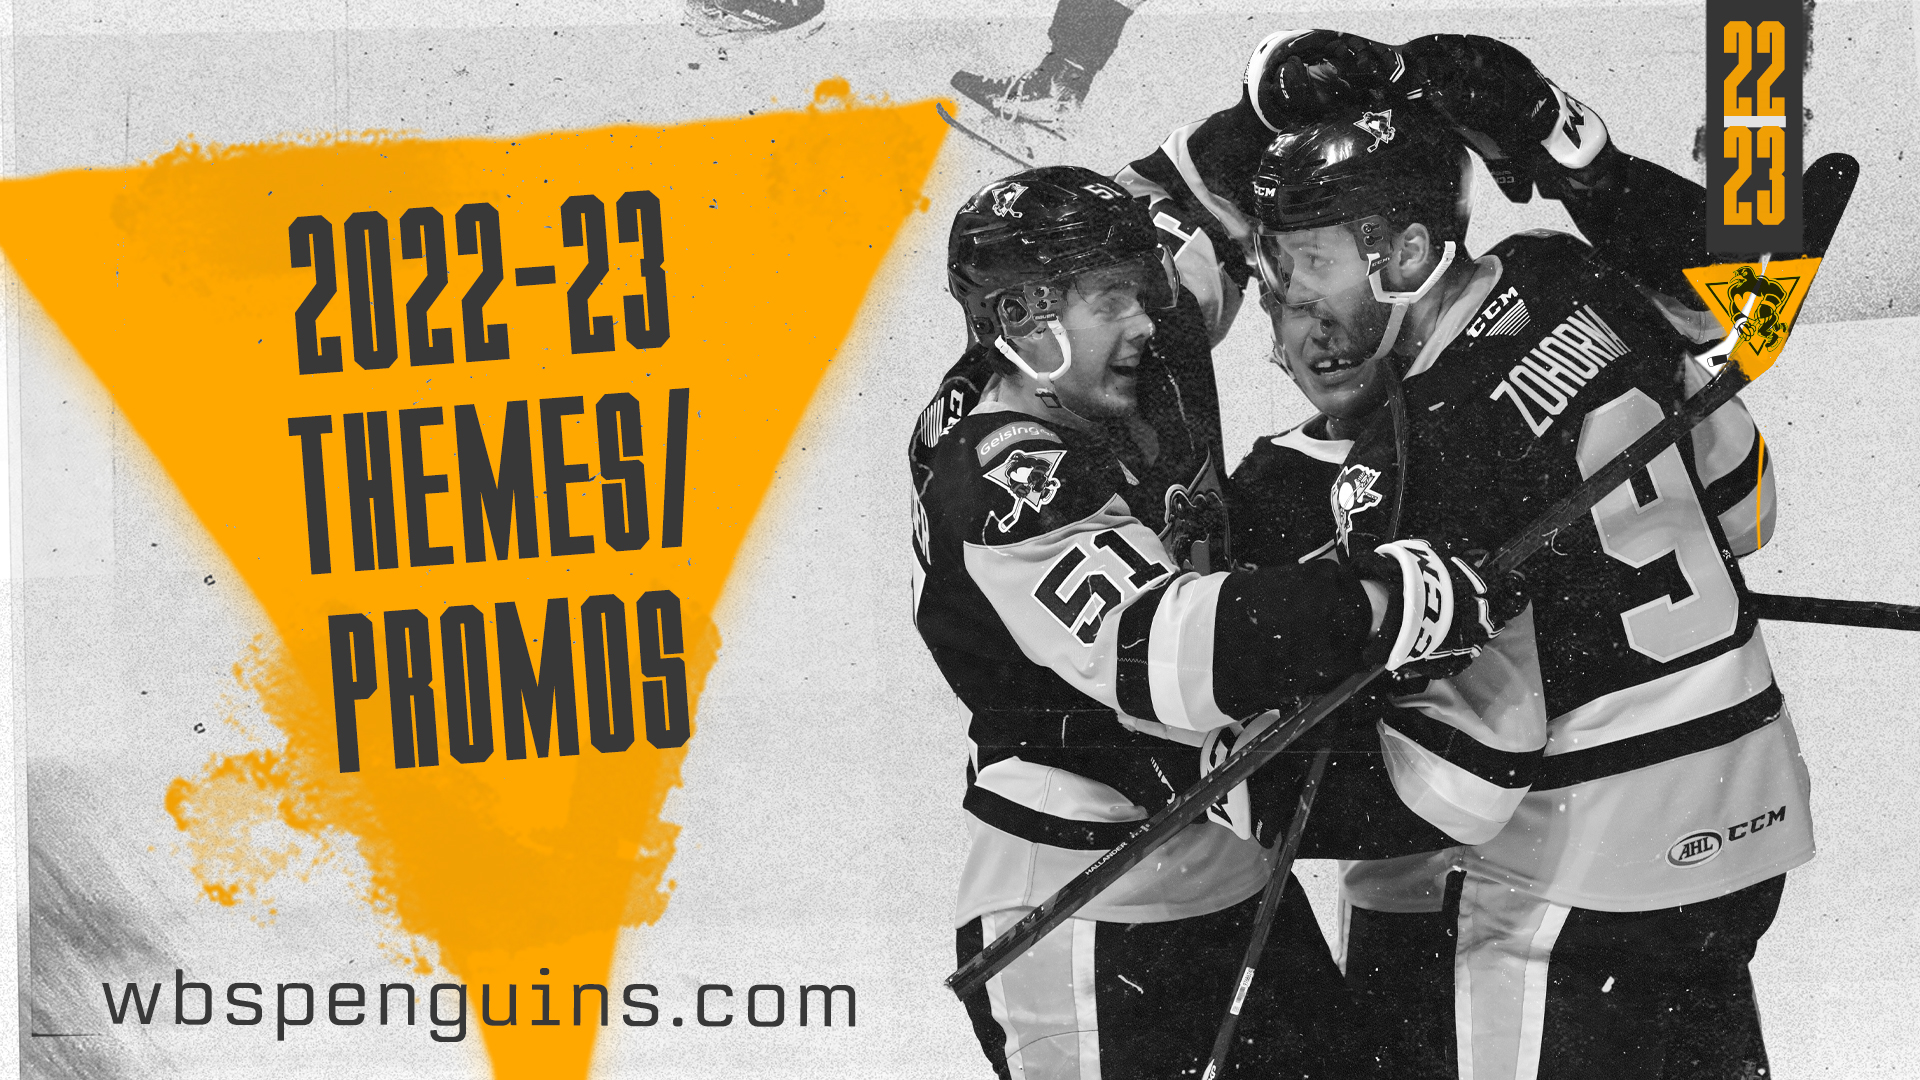 promotional WBS penguins image of two players celebrating on the court.